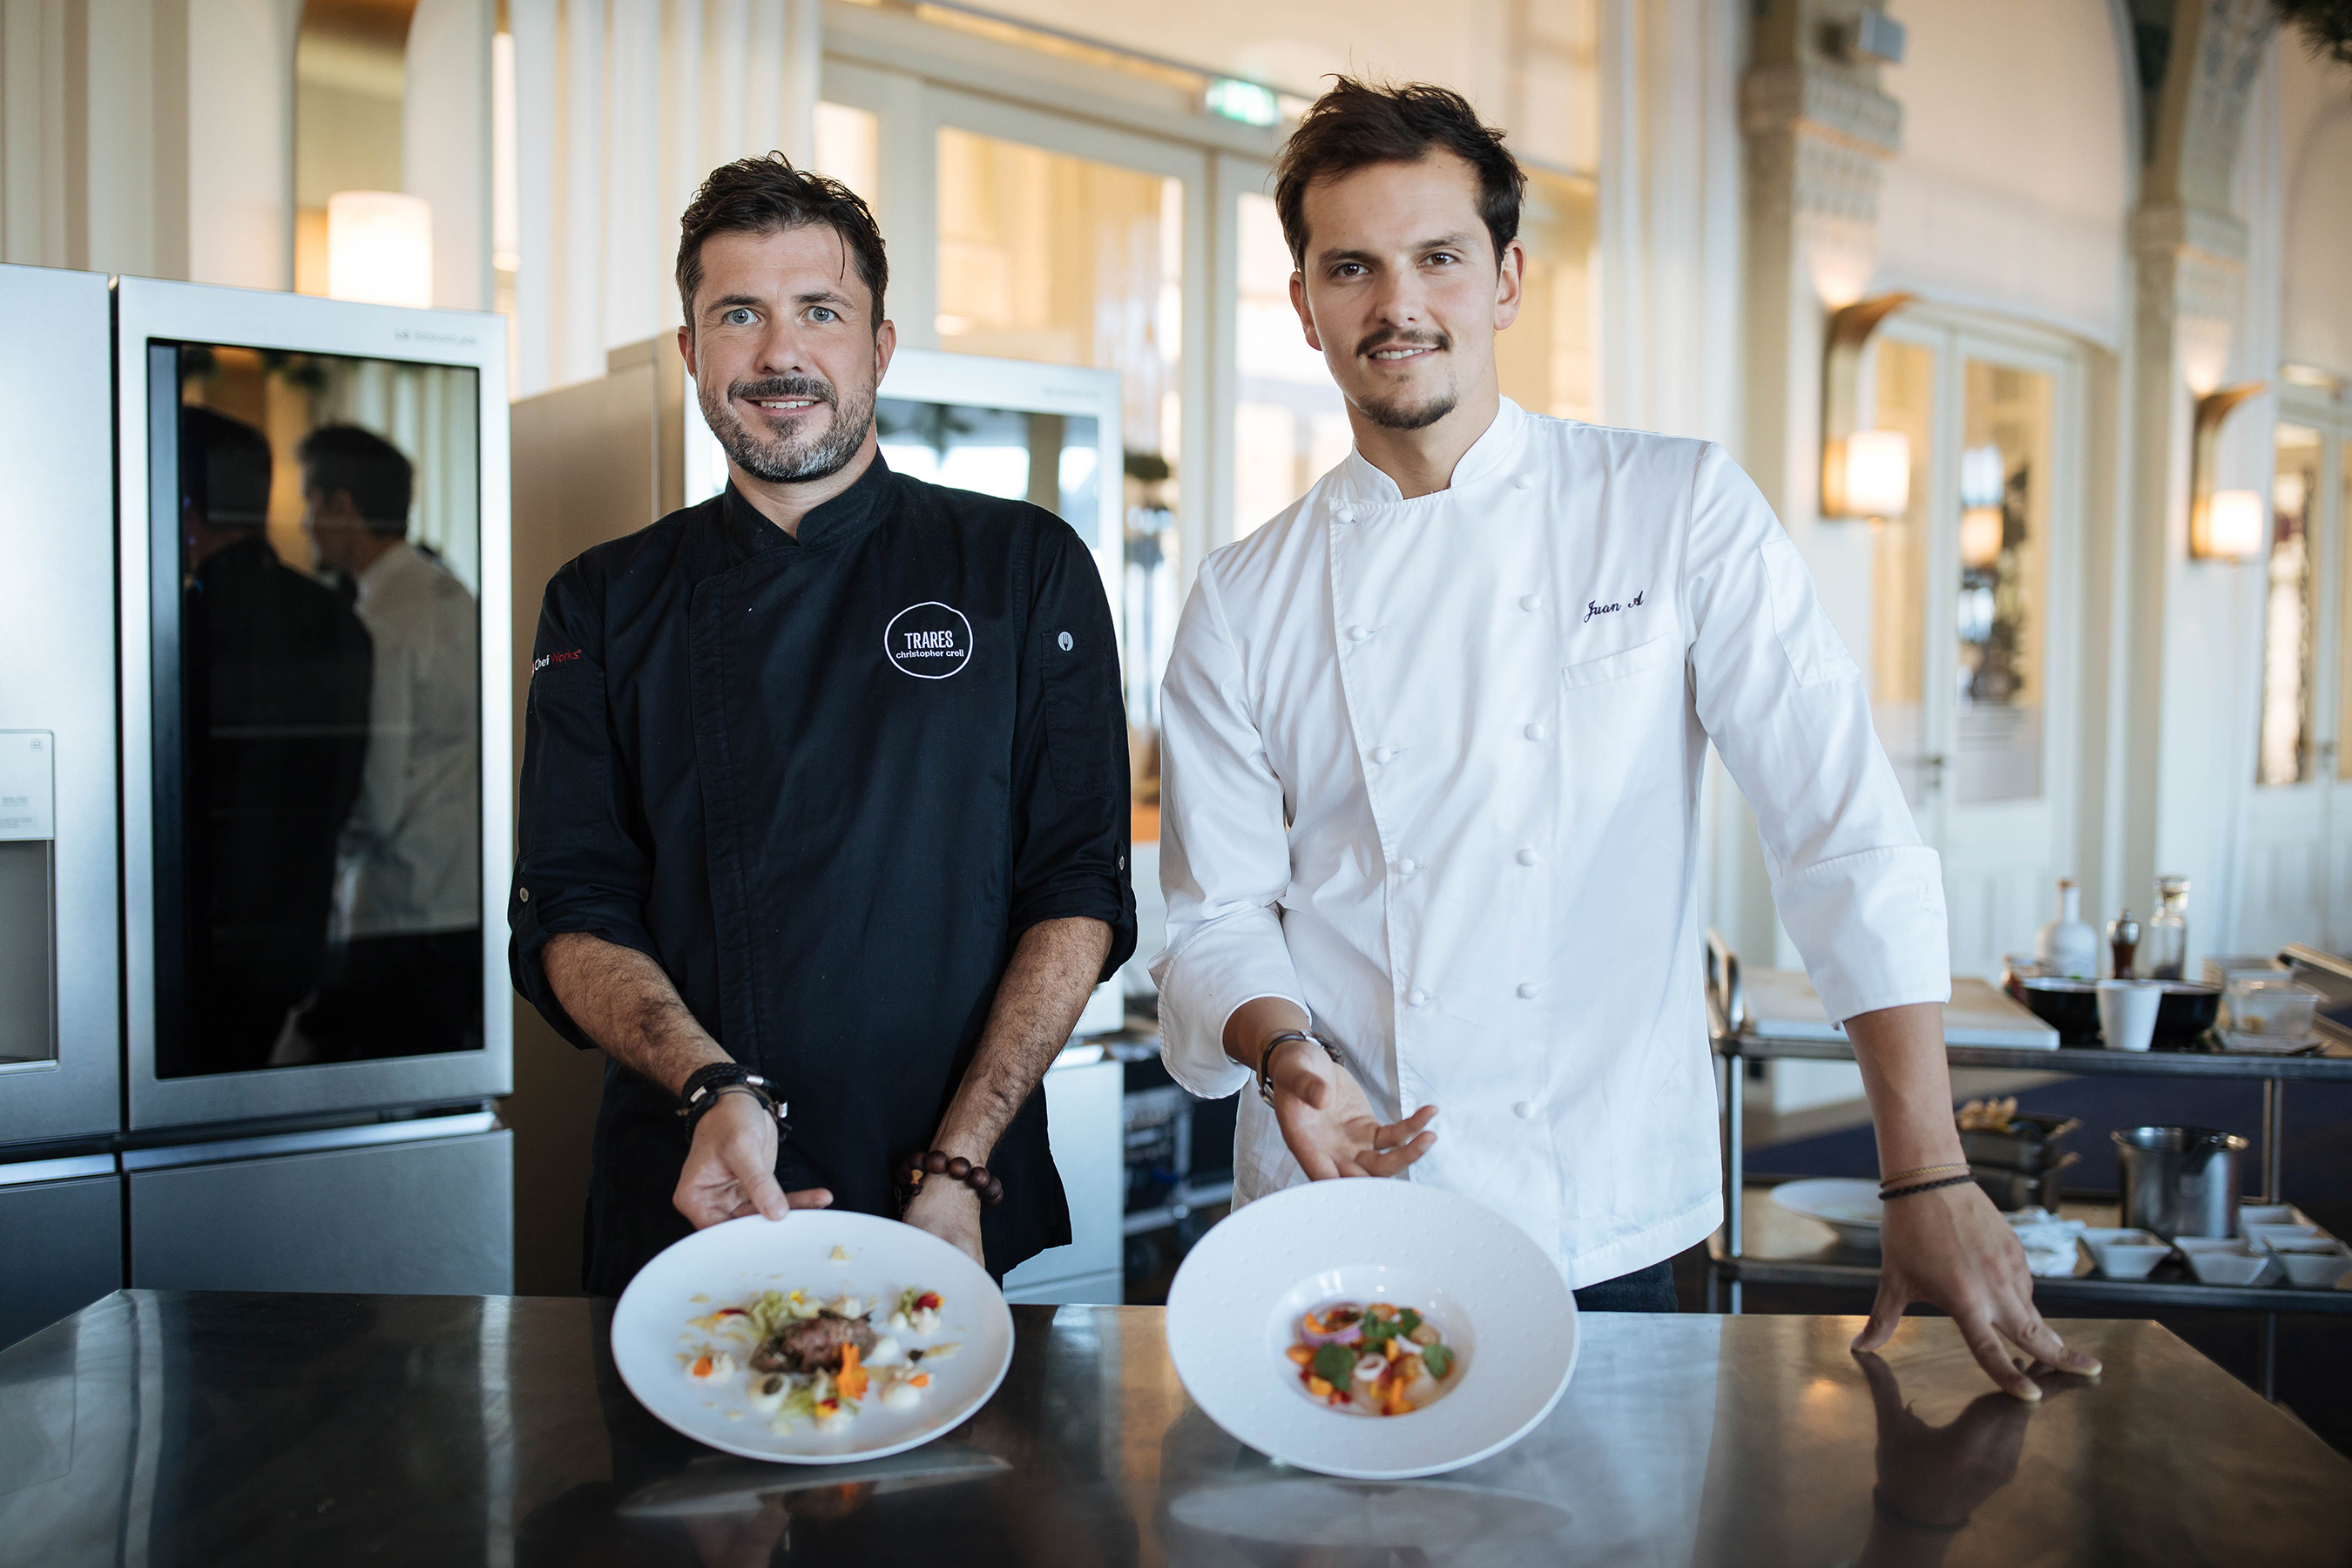 Chefs Christopher Crell and Juan Arbelaez with their own signature dishes ©Lewis Joly